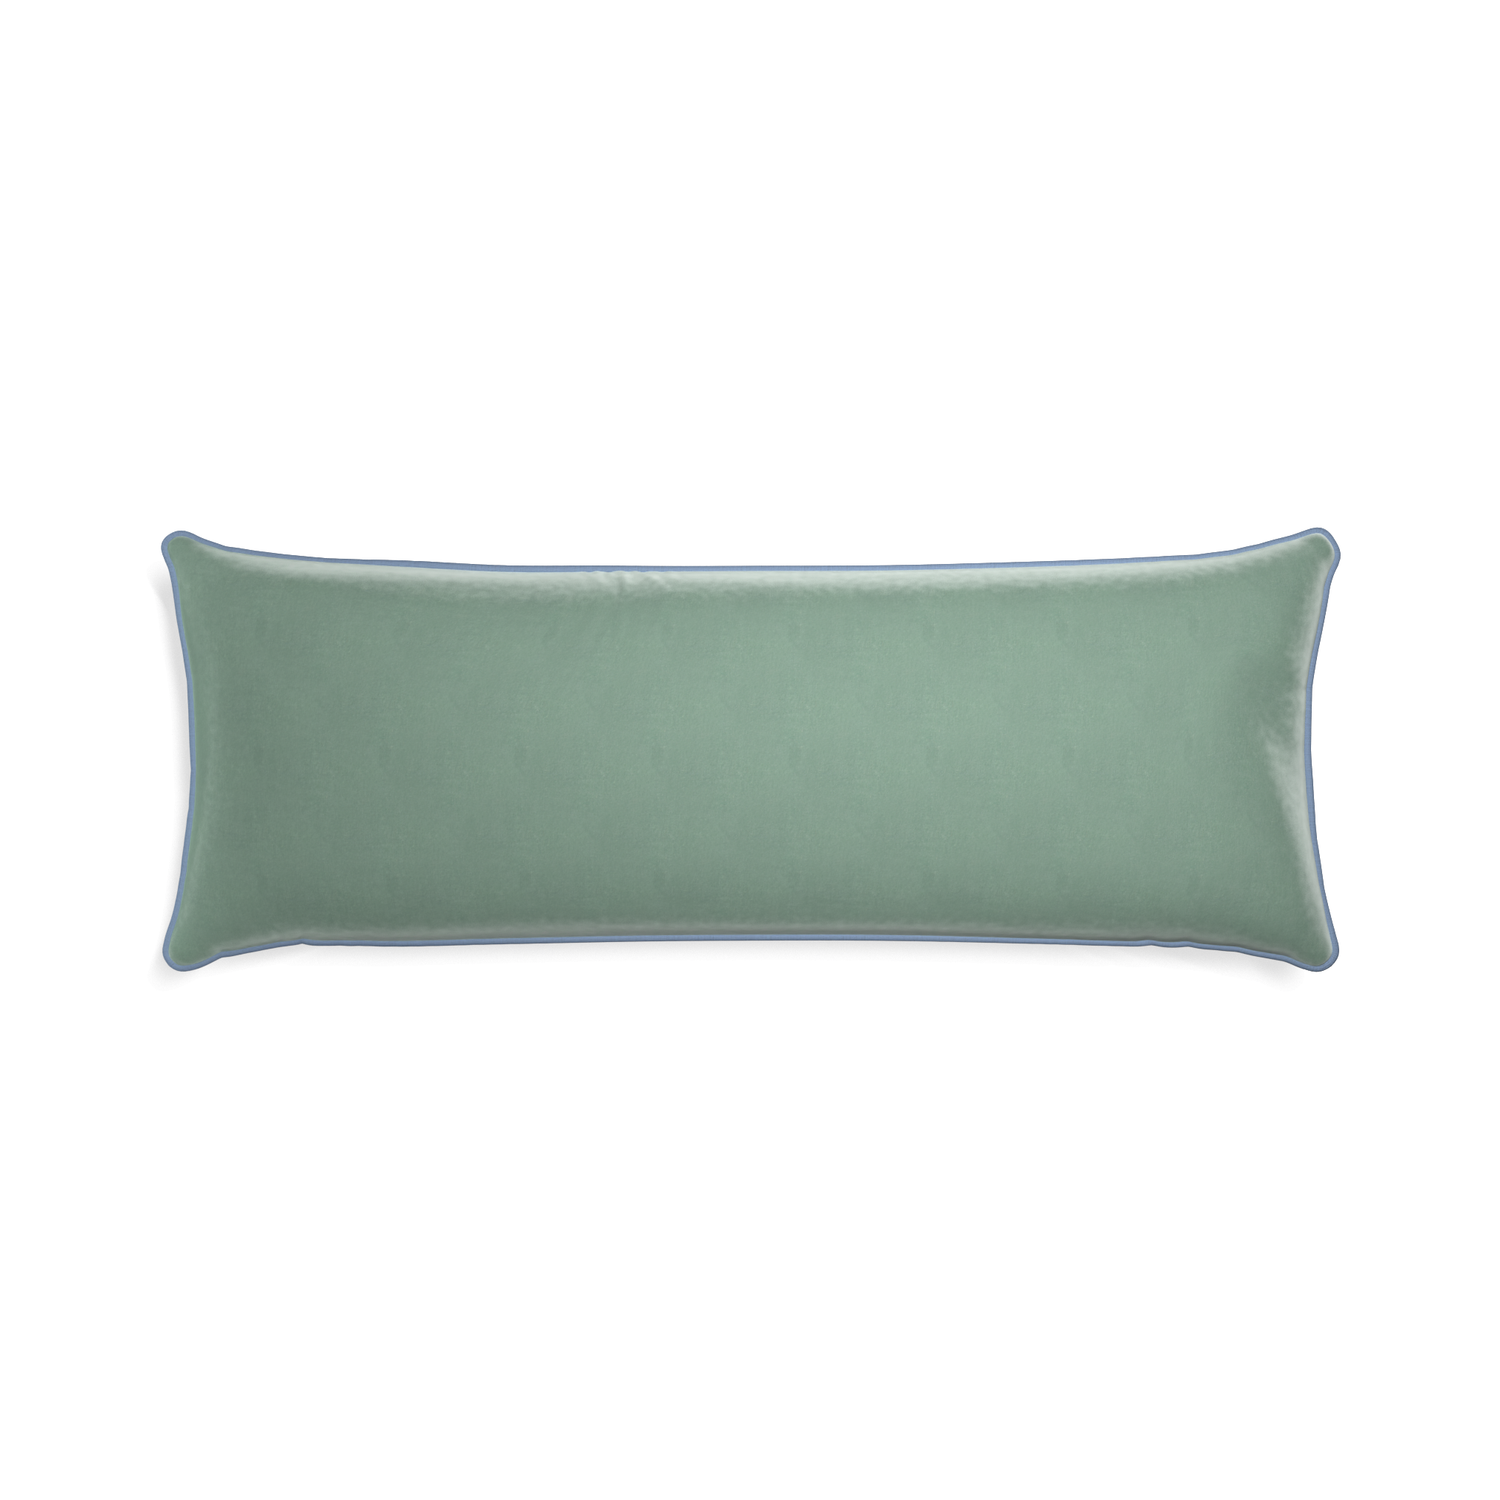 rectangle blue green velvet pillow with sky blue piping